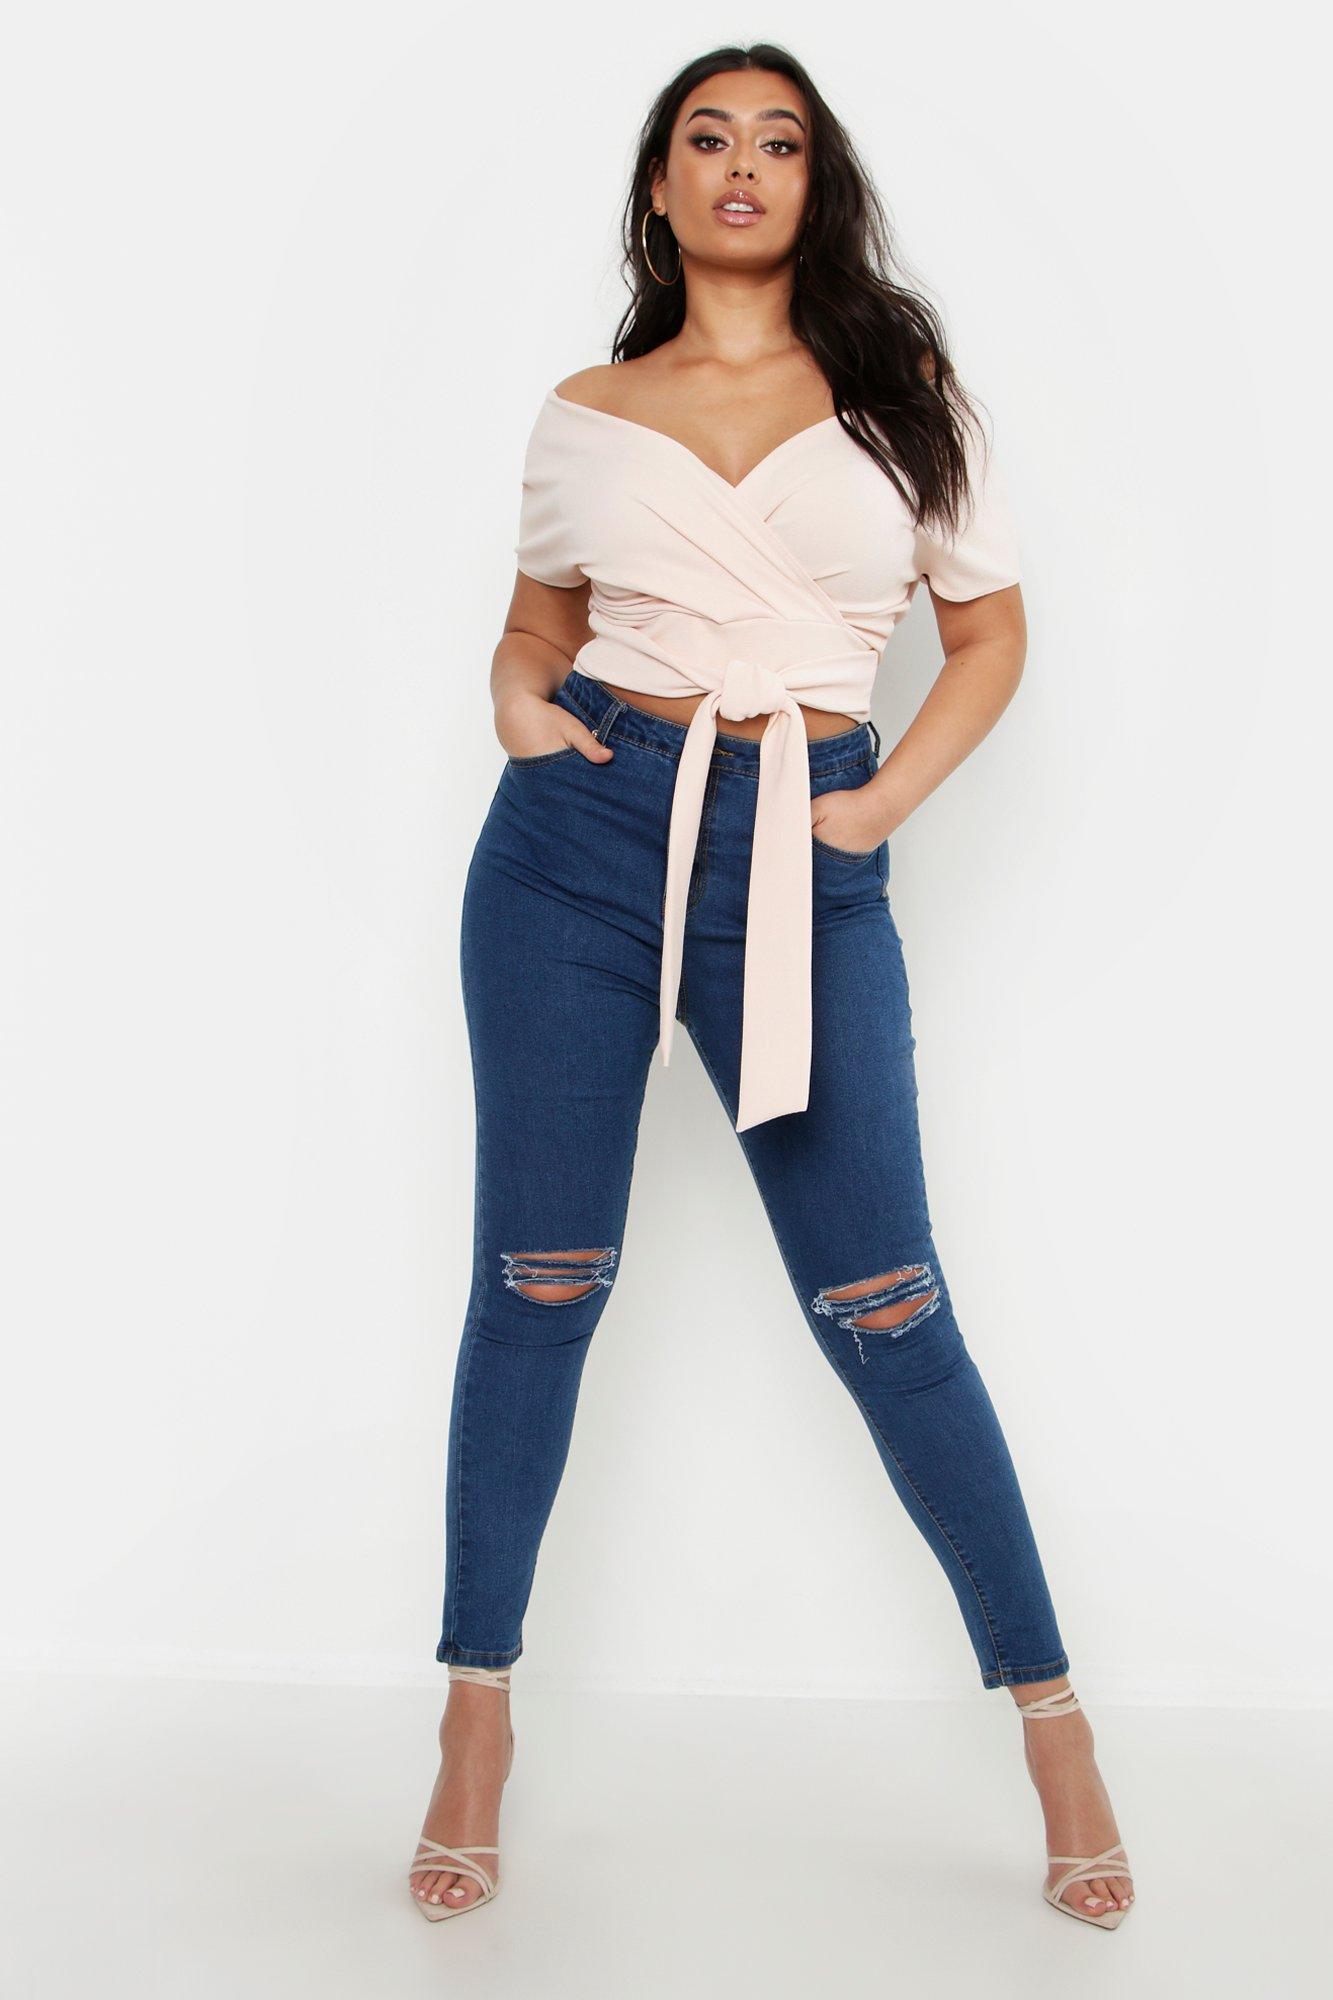 trist morfin Optage Plus Off The Shoulder Wrap Top | boohoo